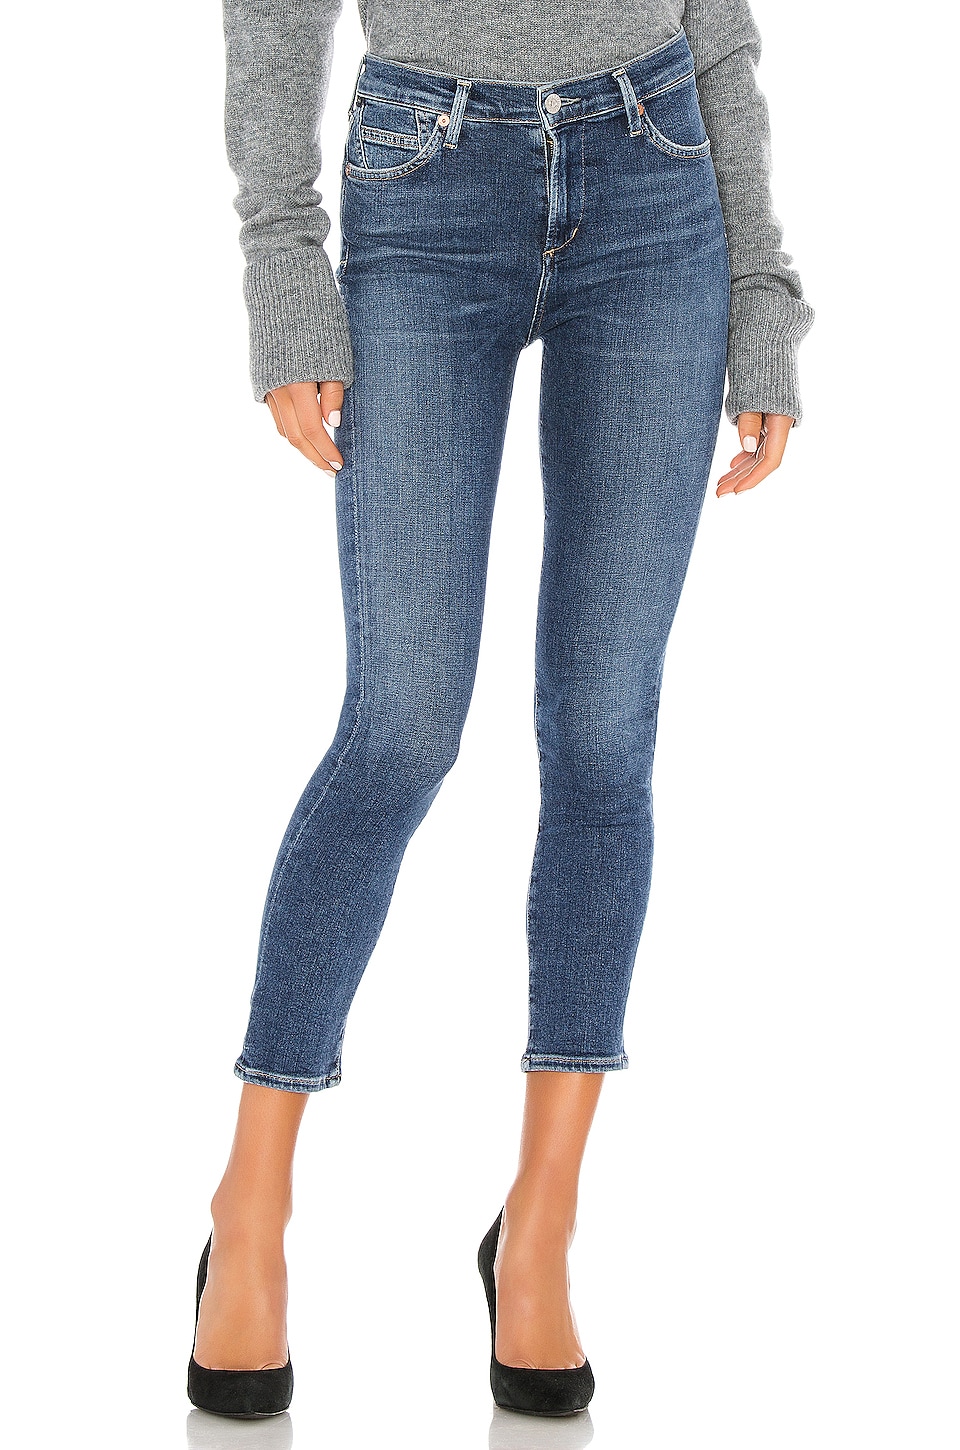 Buy > citizens of humanity rocket high rise skinny sale > in stock